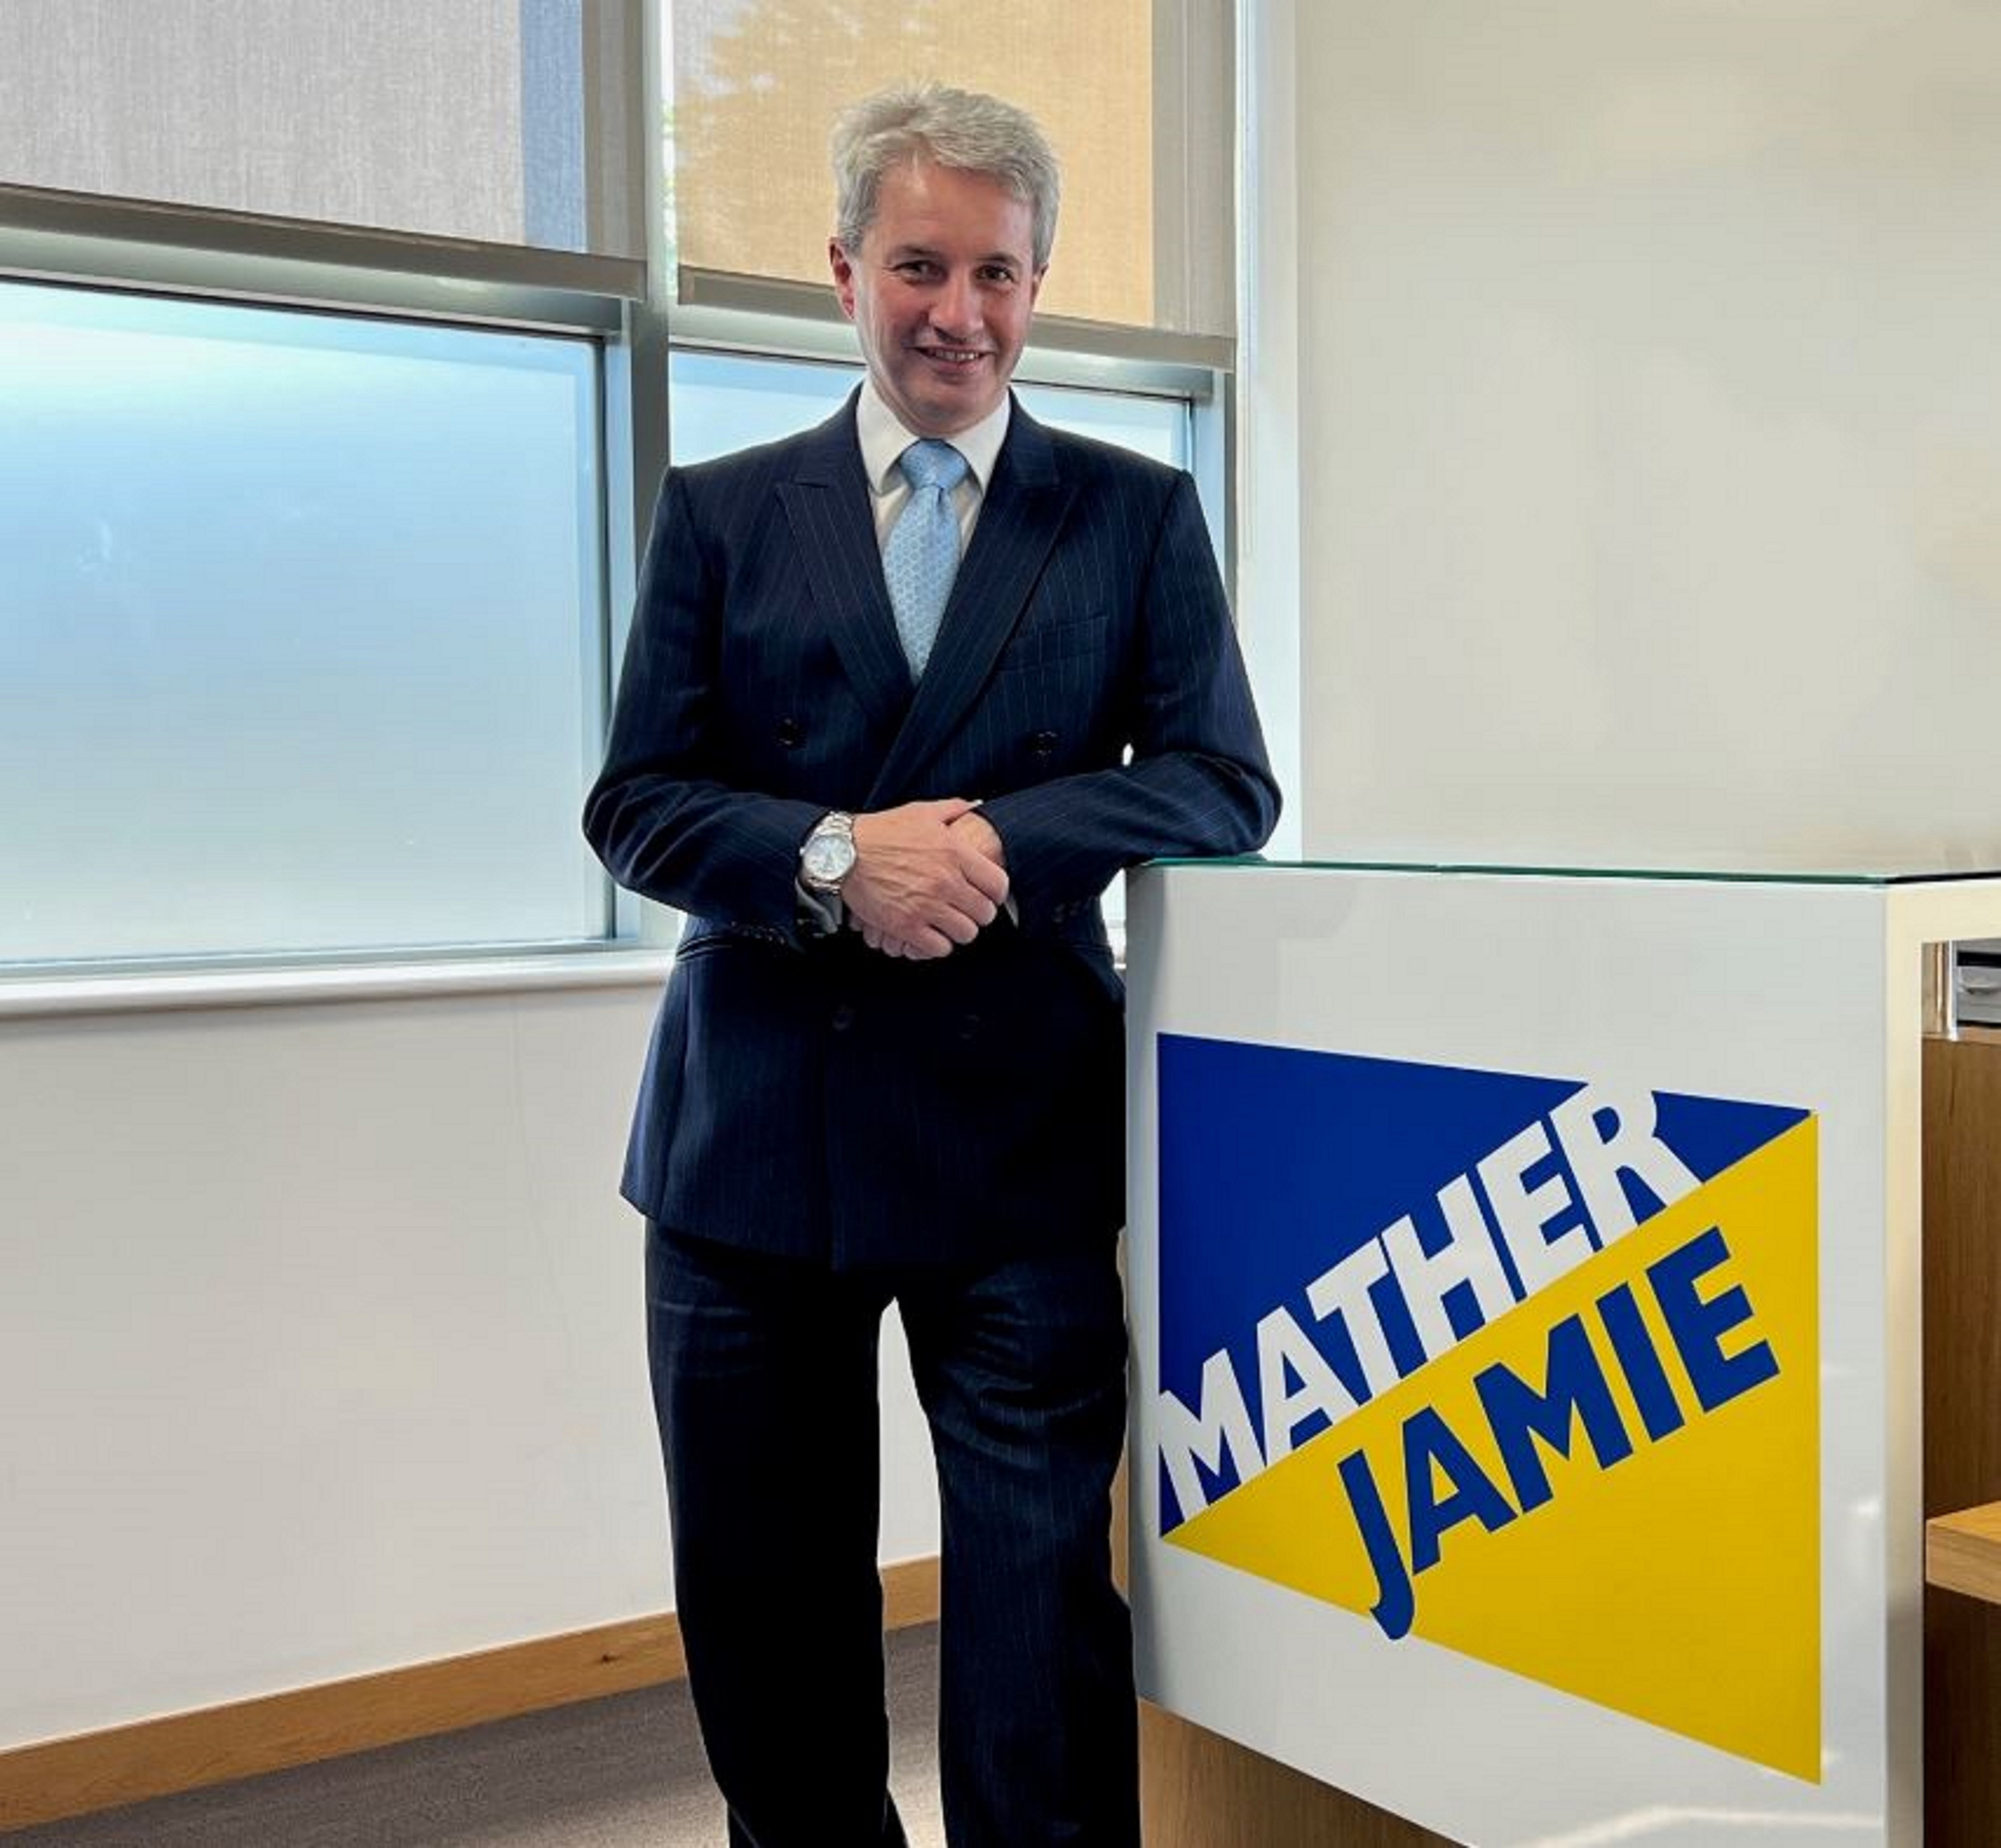 Mather Jamie appoints new commercial valuation surveyor